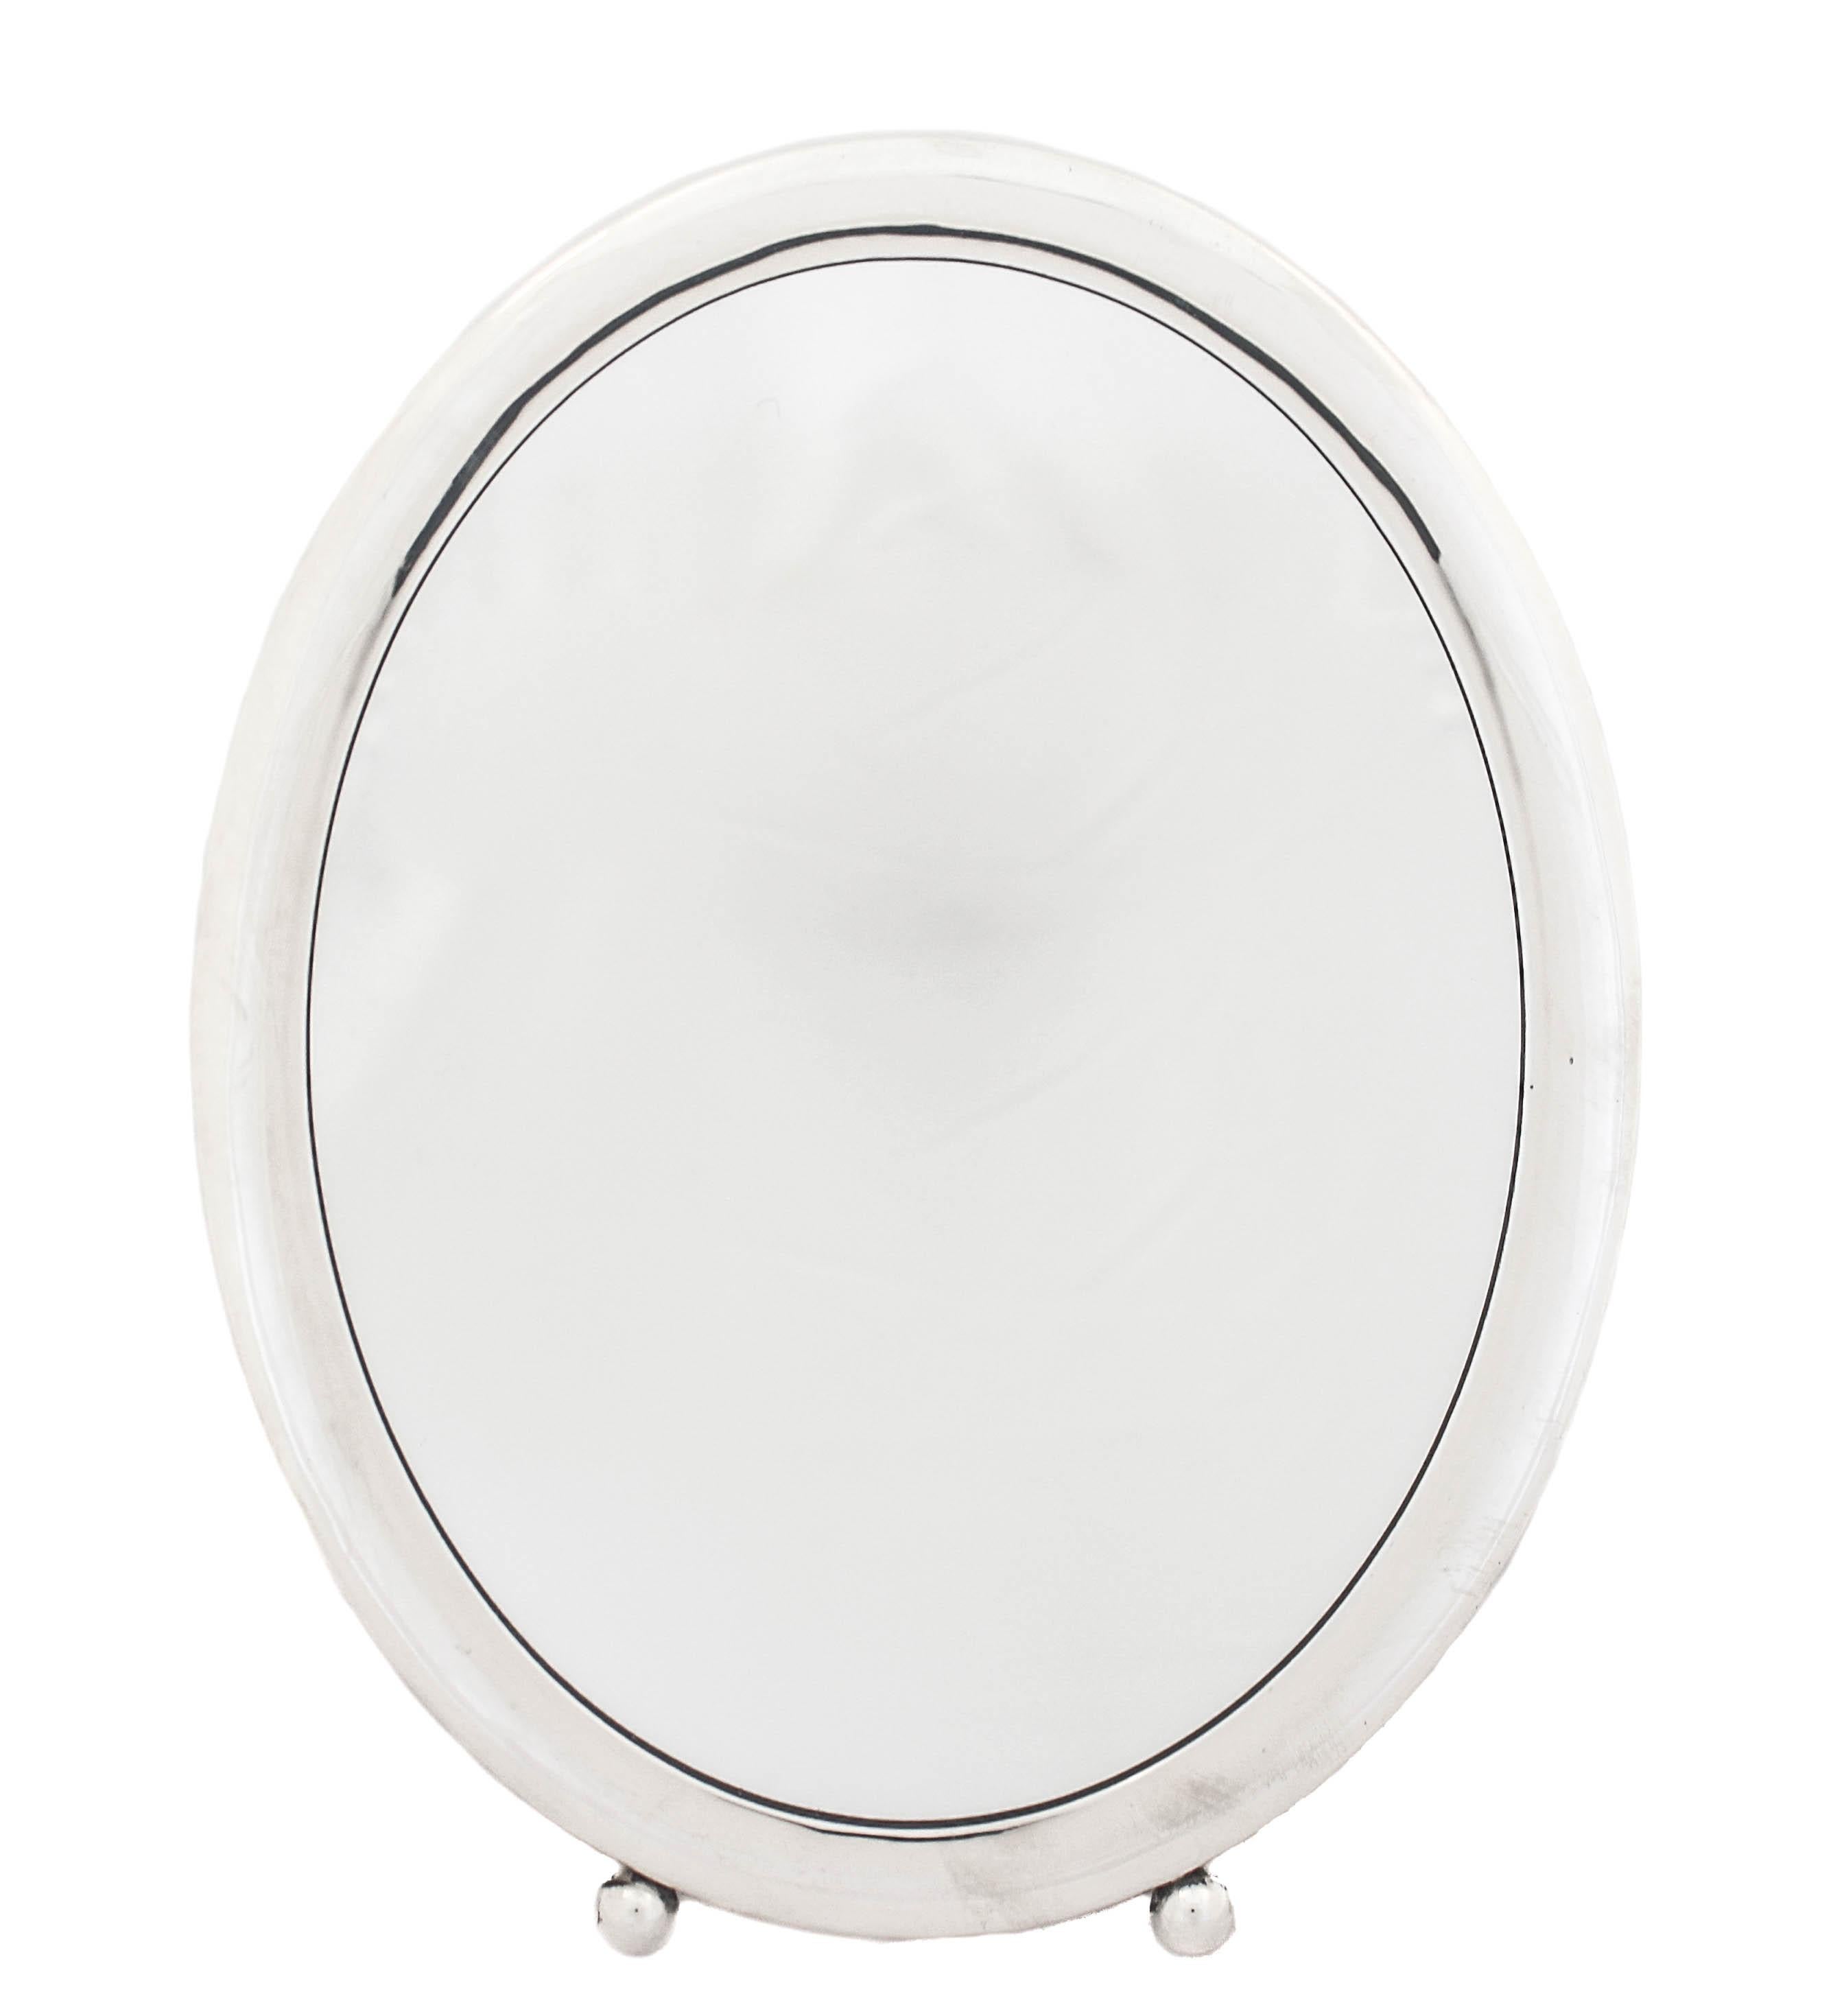 We are happy to offer you this sterling silver Art Deco vanity mirror. It’s the perfect size for you vanity table — not too big and definitely not too small. Notice the shape and the two balls on the bottom, very Art Deco.